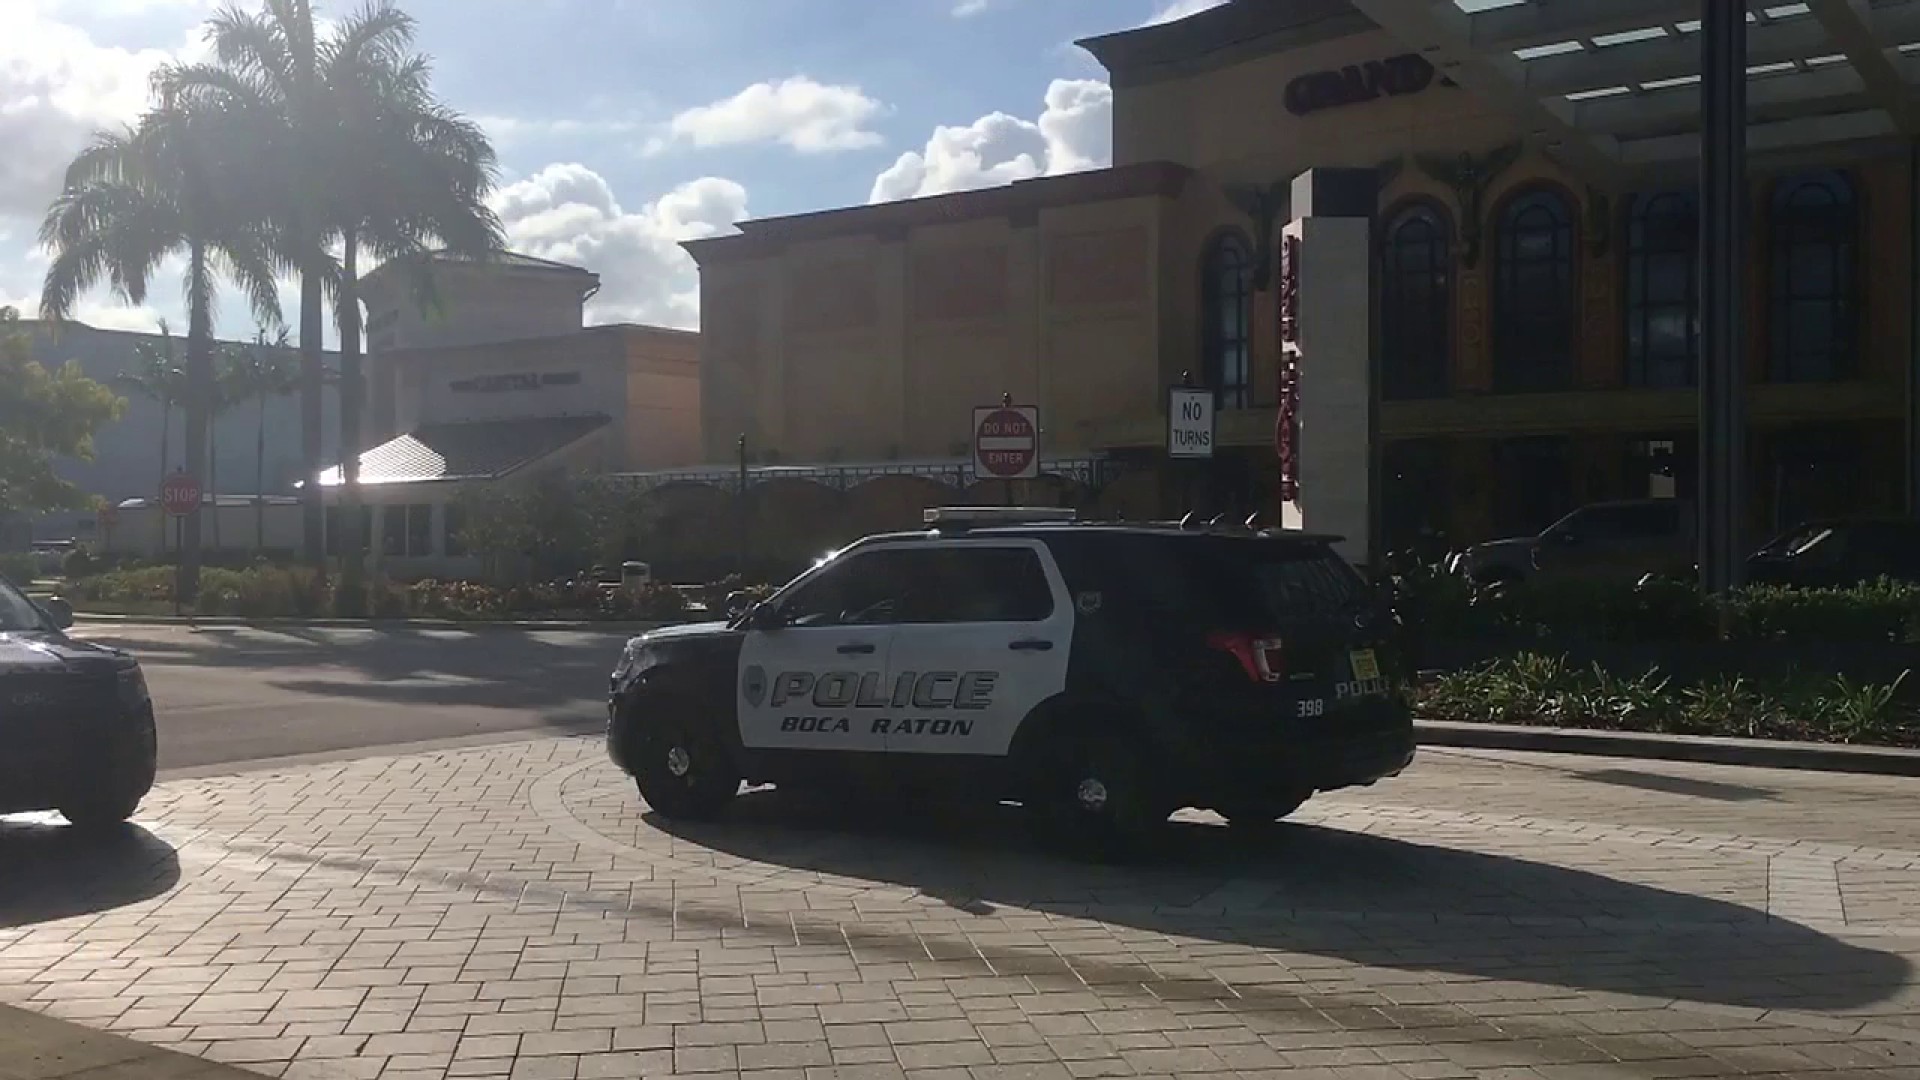 Town Center at Boca Raton back open after fears of shooter cause confusion,  panic